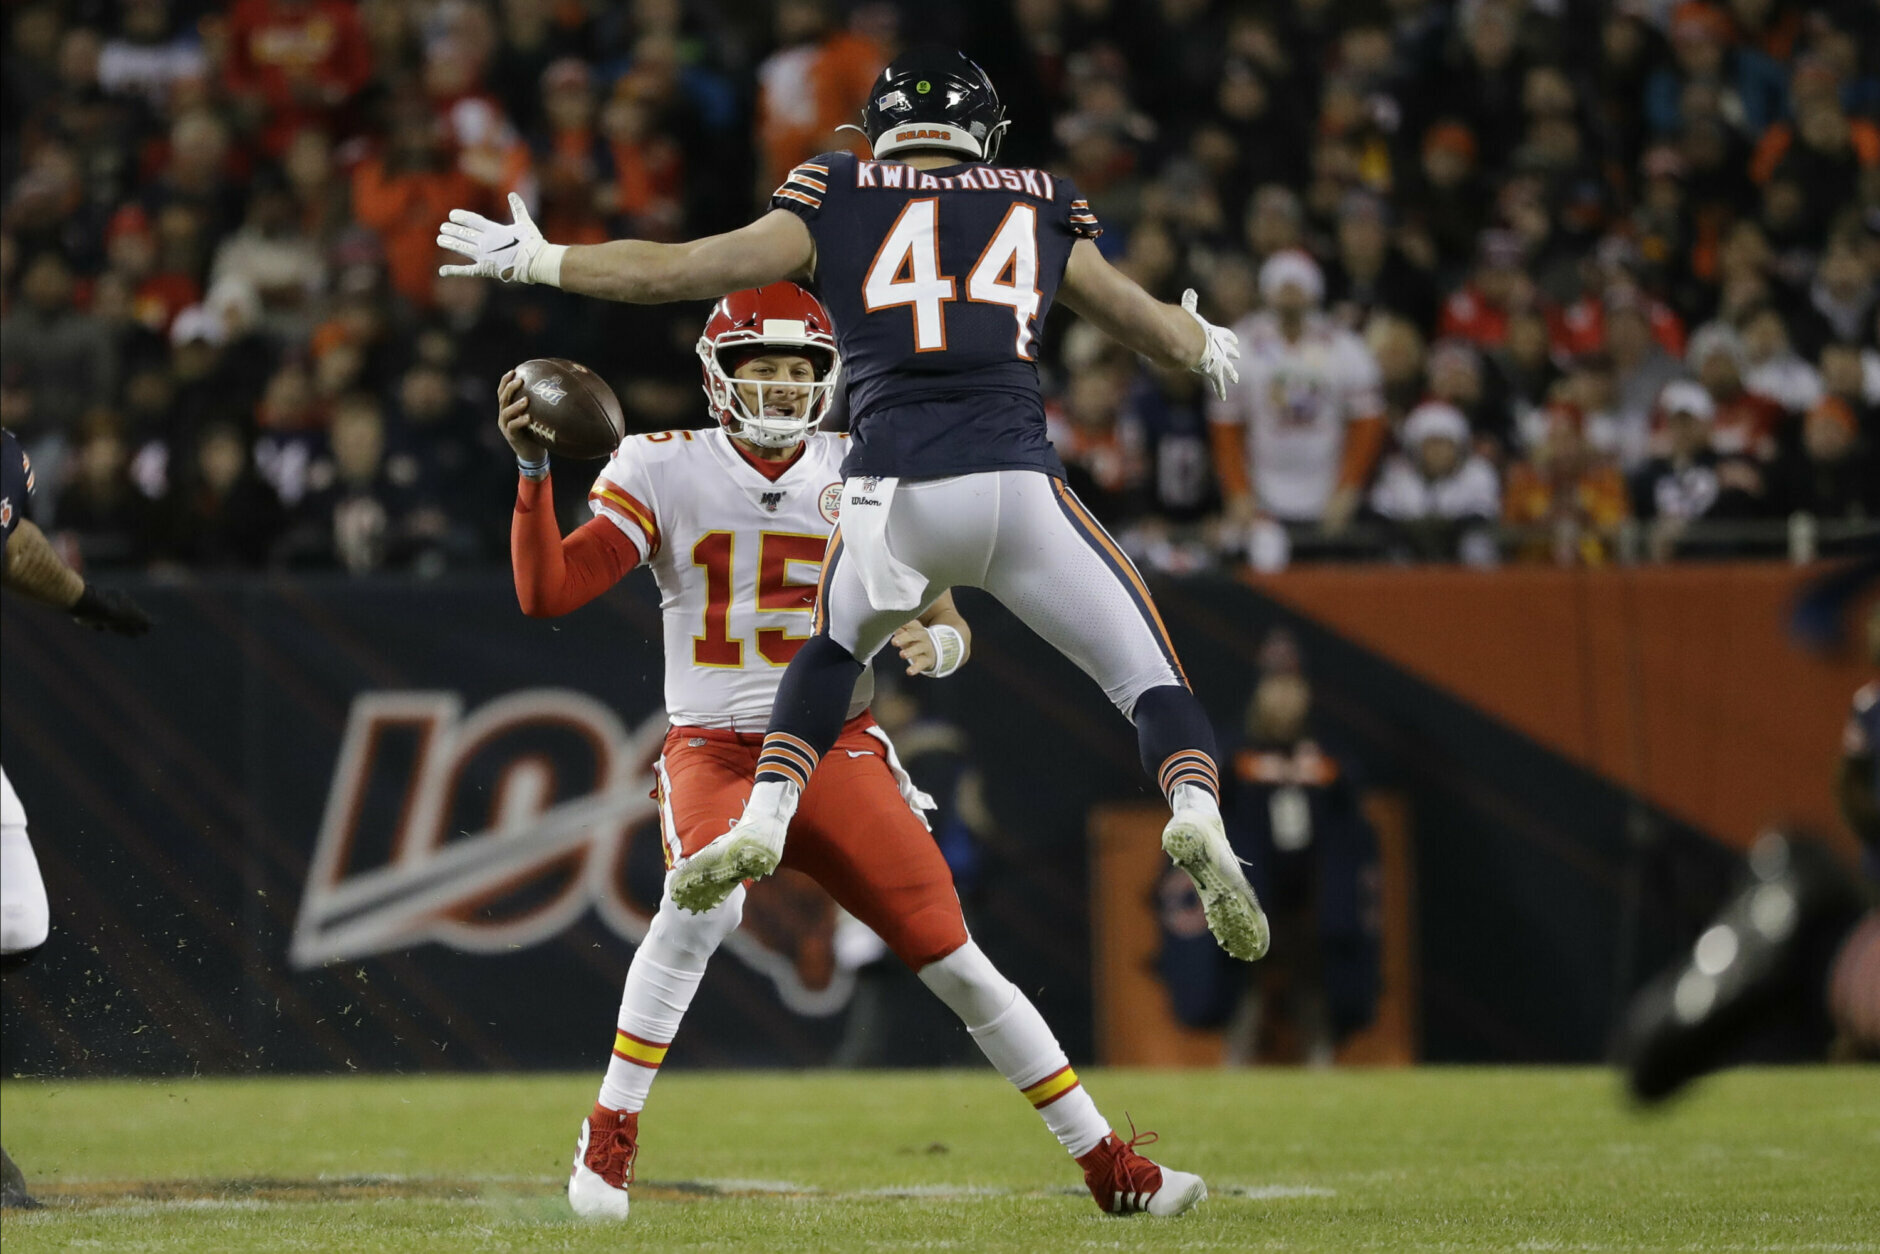 <p><b><i>Chiefs 26</i></b><br />
<b><i>Bears 3</i></b></p>
<p>Look, I&#8217;m not advocating for bribery … but maybe <a href="https://profootballtalk.nbcsports.com/2019/12/16/cordarrelle-patterson-wonders-if-he-should-start-bringing-donuts-for-the-refs/" target="_blank" rel="noopener">Cordarrelle Patterson really should bring doughnuts for the refs</a>.</p>
<p>But Kansas City already has a sweet treat in Patrick Mahomes. In his 30th career game, he became the fastest player to reach 9,000 passing yards and 75 touchdown passes, and <a href="https://twitter.com/MySportsUpdate/status/1208947503585996800?s=20" target="_blank" rel="noopener">trolled the most notable team</a> to pass him by in the 2017 draft. If T-Sizzle helps that Chiefs defense stay on <a href="https://twitter.com/ESPNStatsInfo/status/1208968204057493504?s=20" target="_blank" rel="noopener">its hot streak</a>, this is the only real threat to Baltimore in the AFC.</p>
